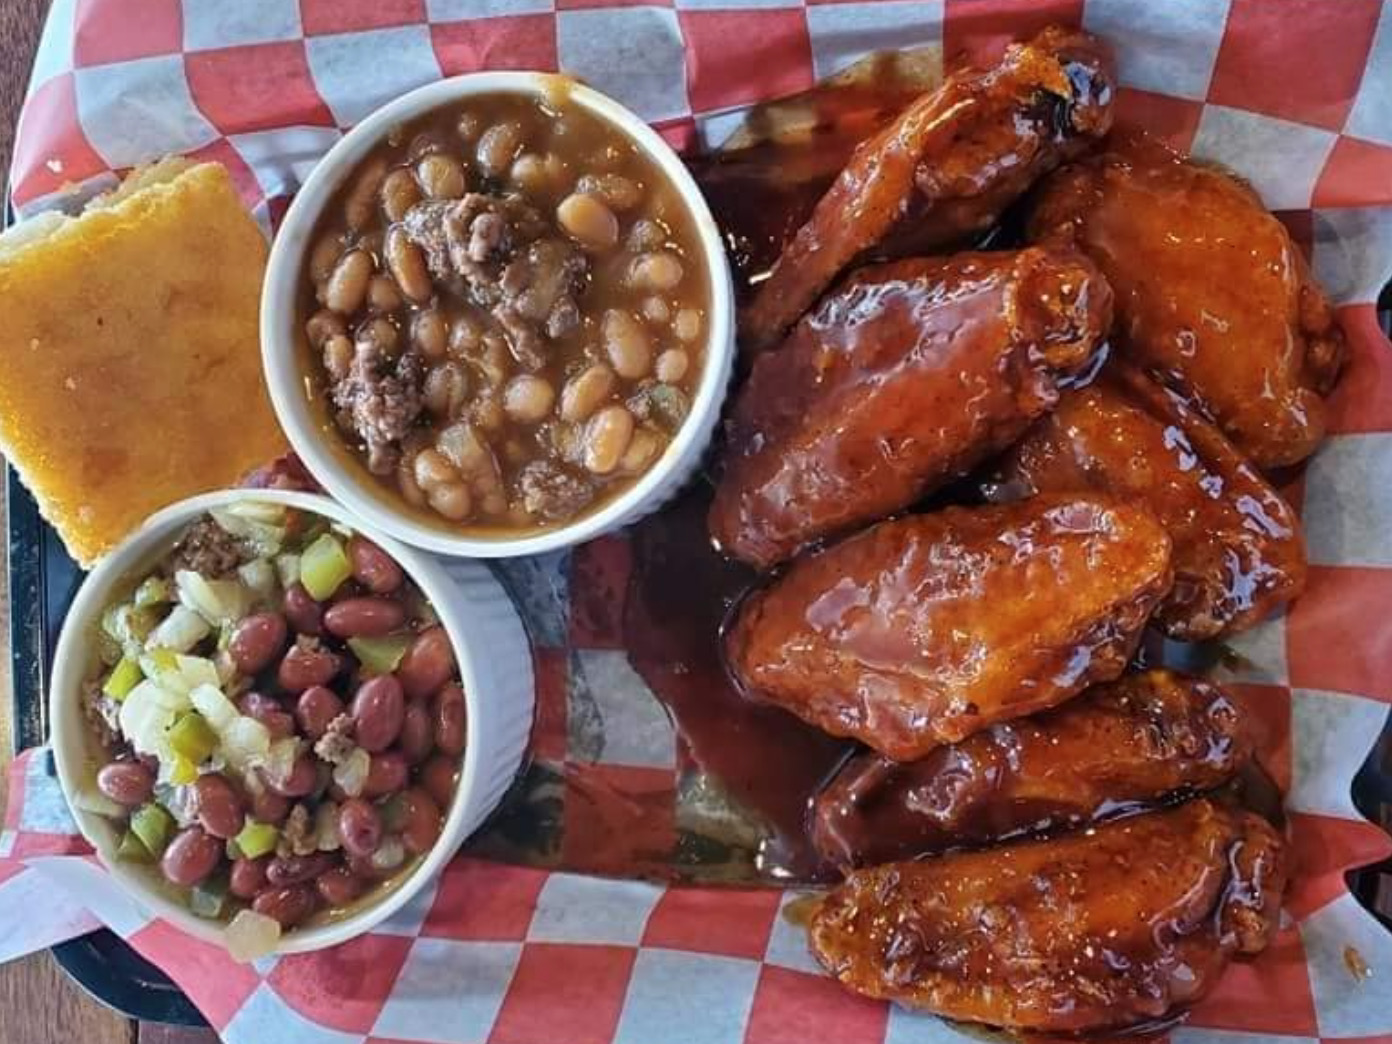 Big Daddy's wings and sides